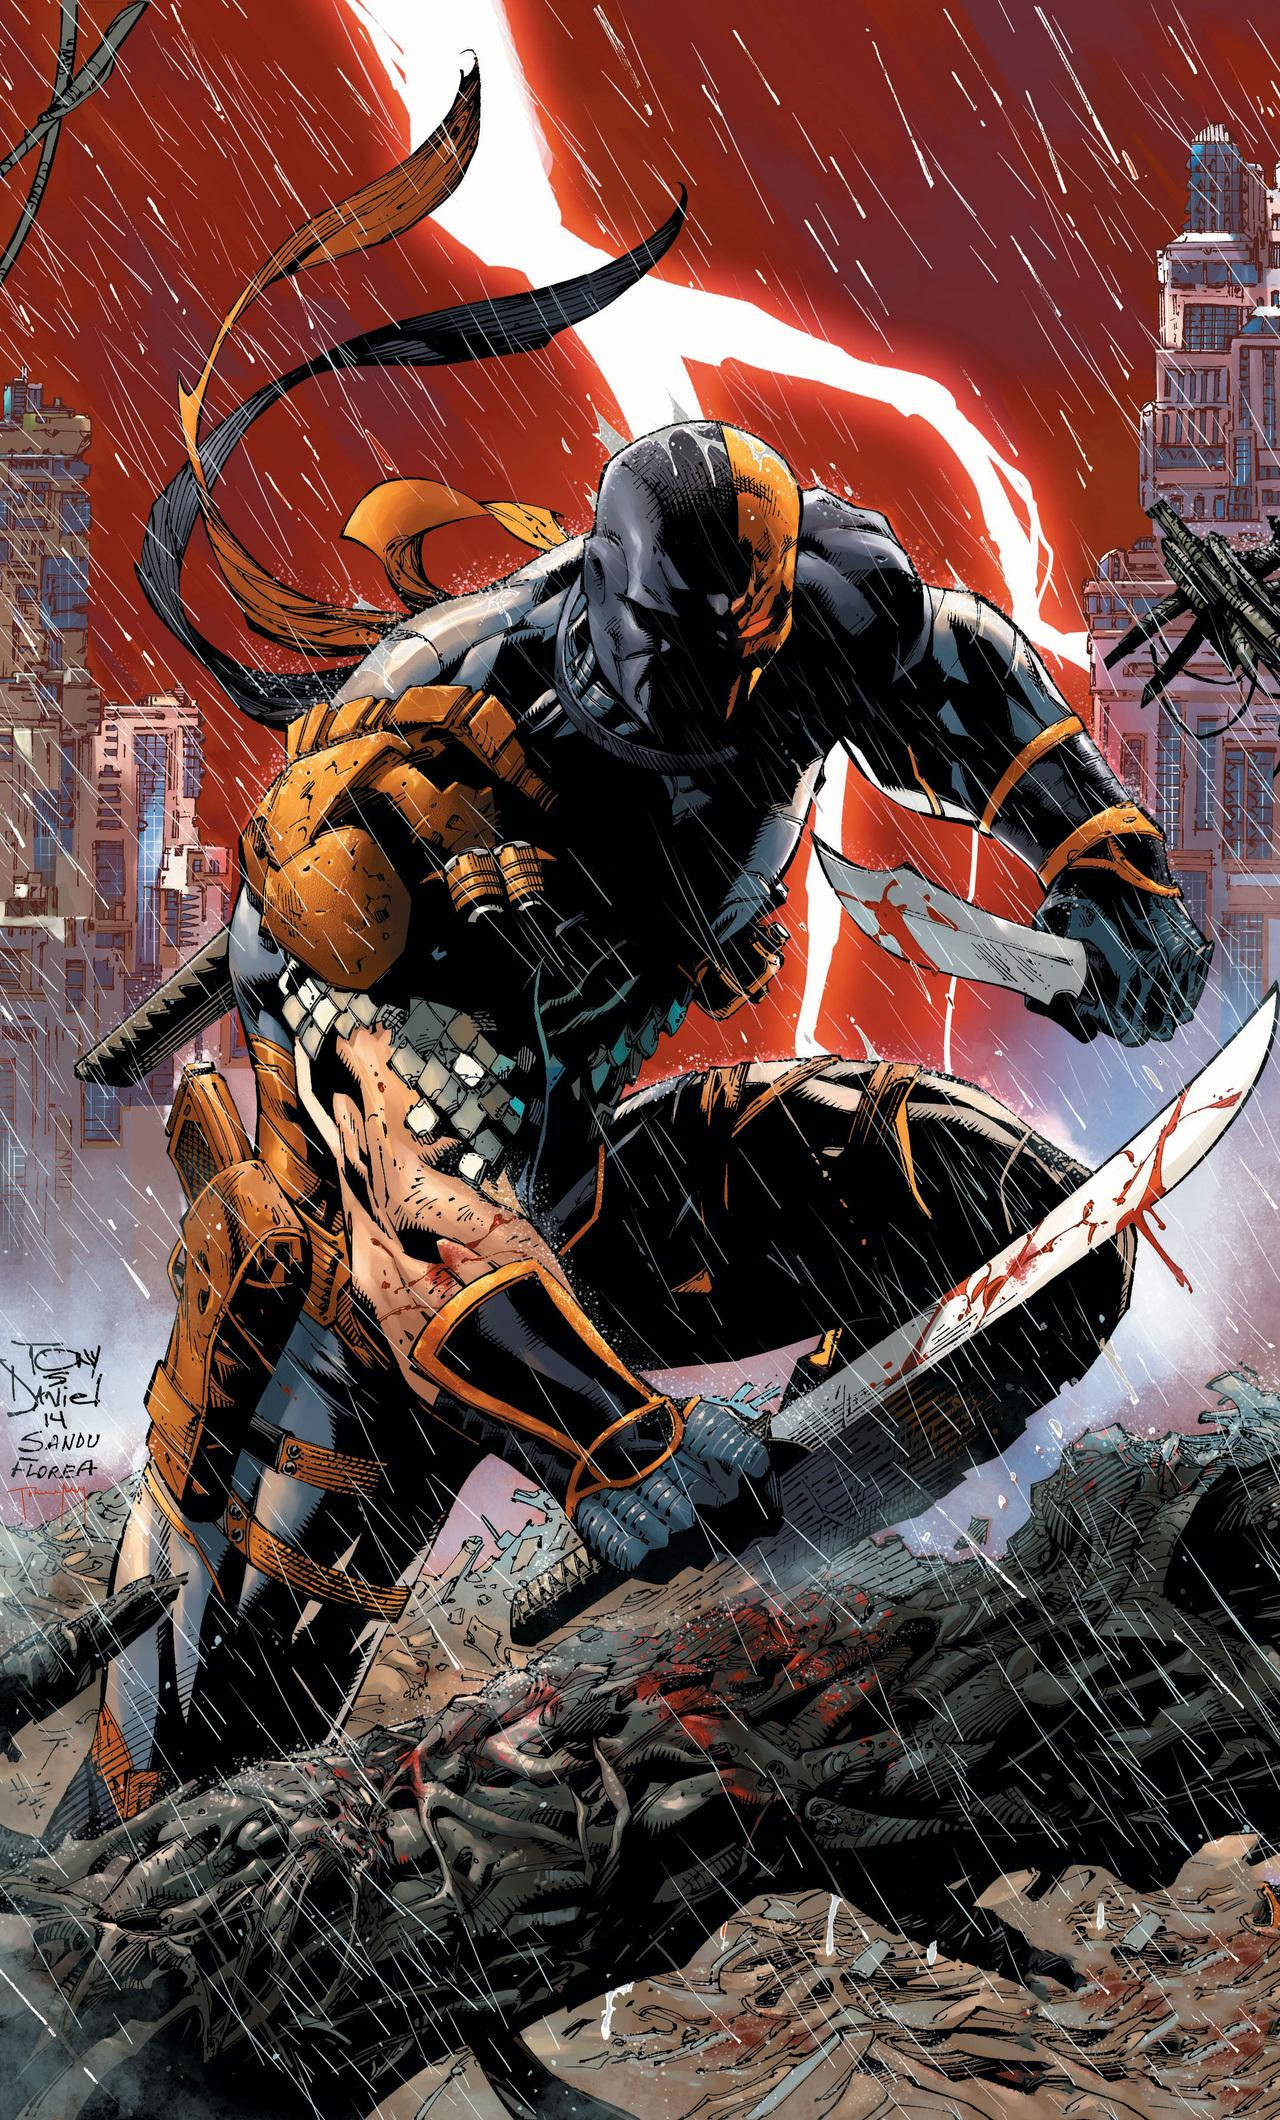 A Comic Book Cover With A Man Holding A Sword Background